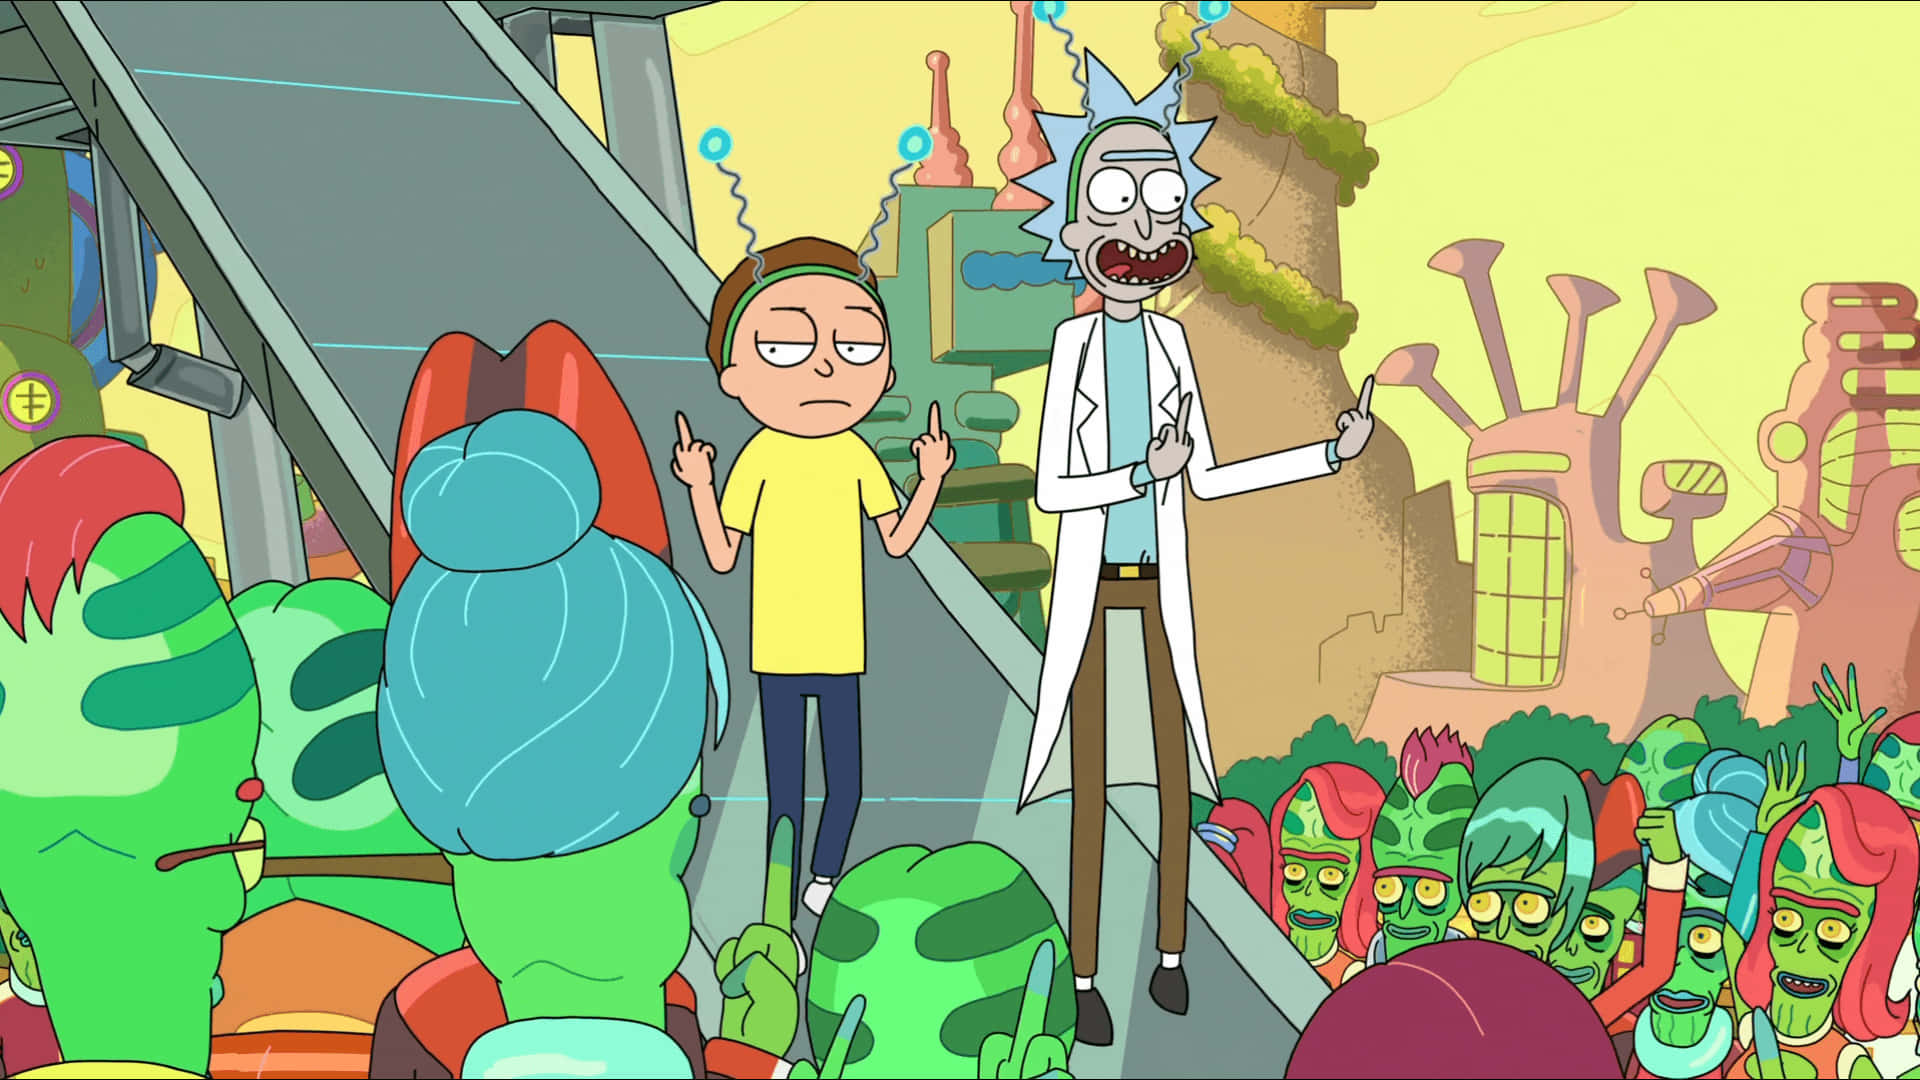 Get Rick, Morty, and this awesome laptop together now! Wallpaper